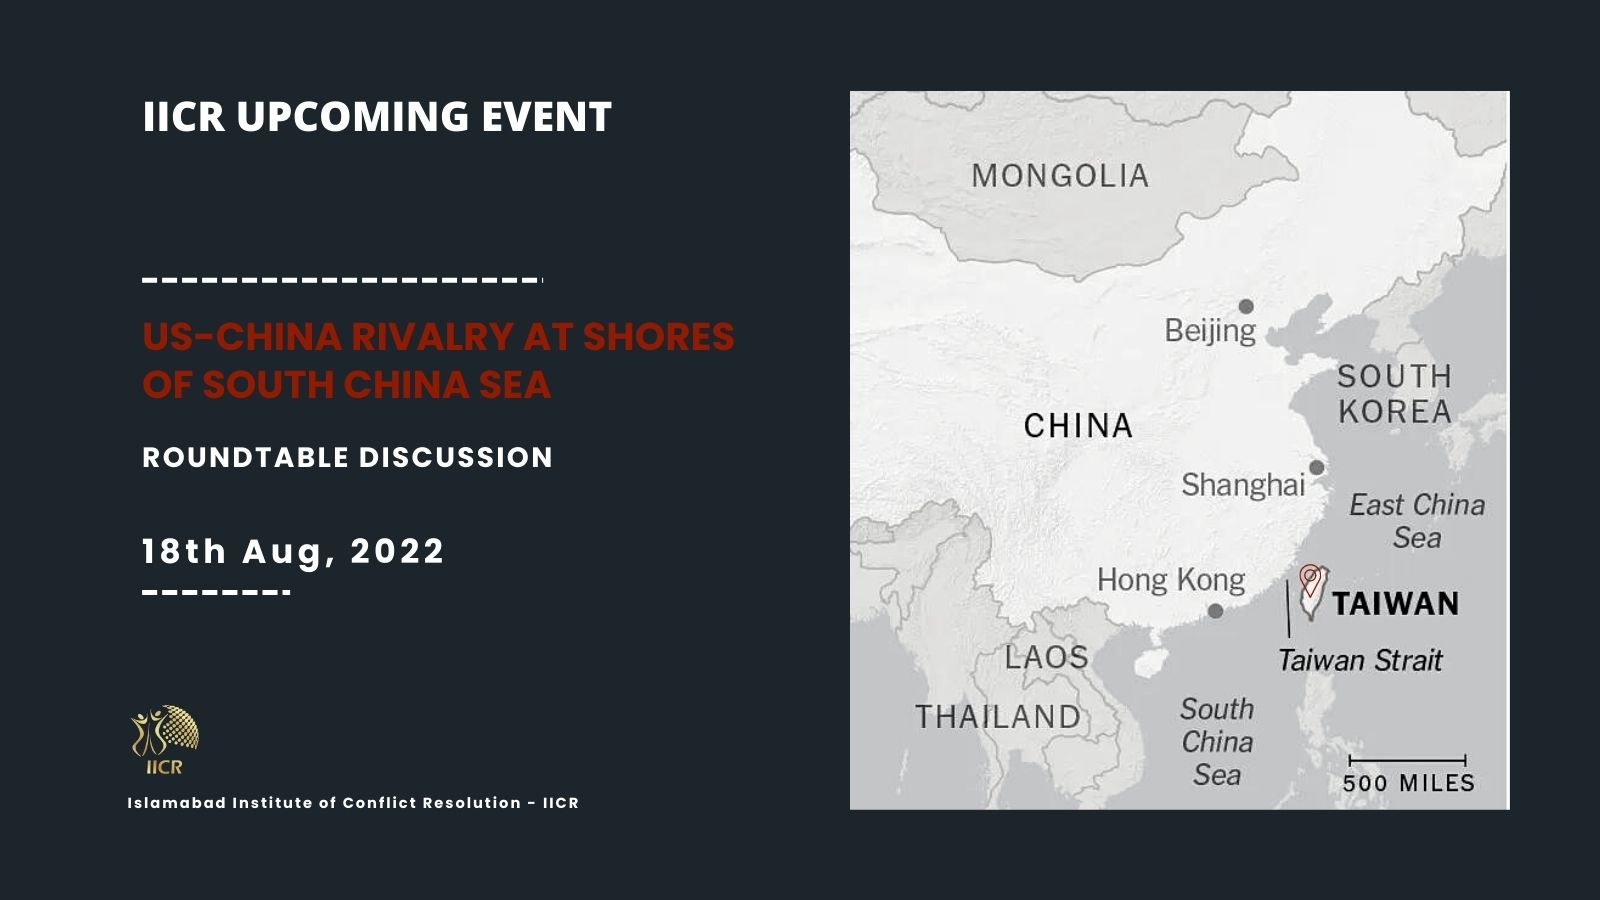 Roundtable Discussion on “U.S. – China Rivalry at the Shores of South-China Sea”